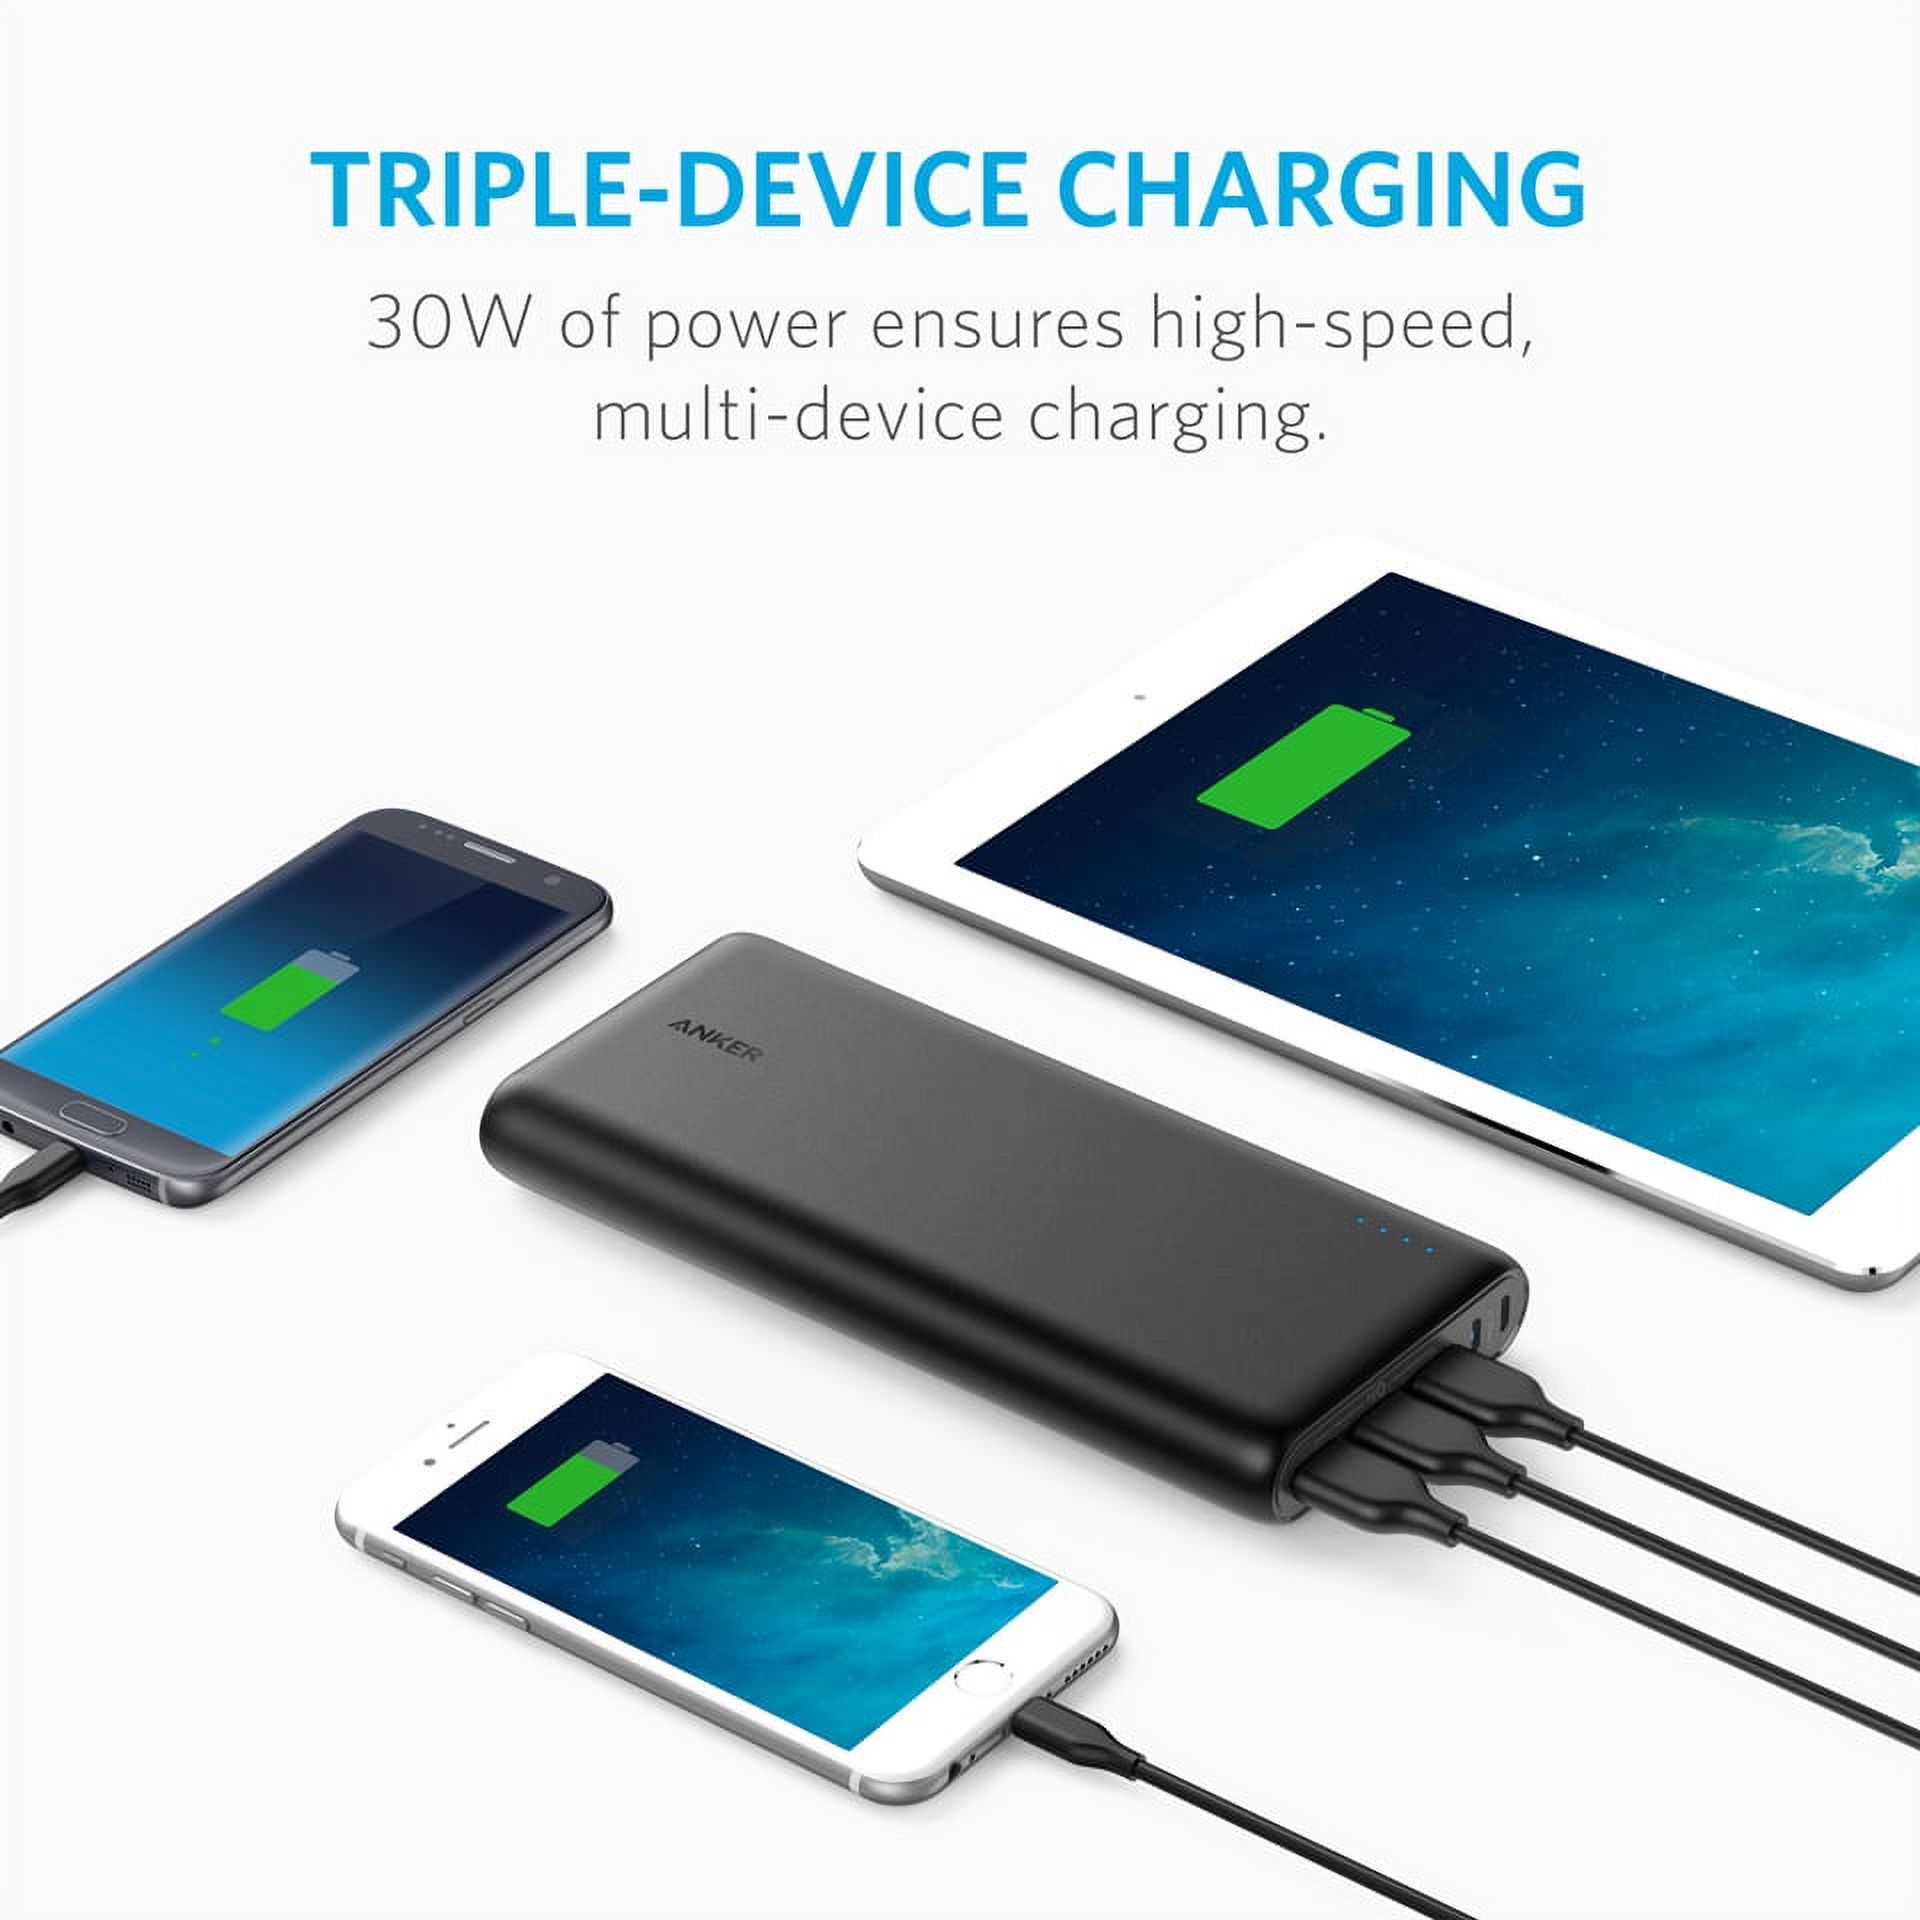 Anker PowerCore 26800 Portable Charger, 26800mAh External Battery with Dual Input Port and 3 USB Output Port - image 4 of 7